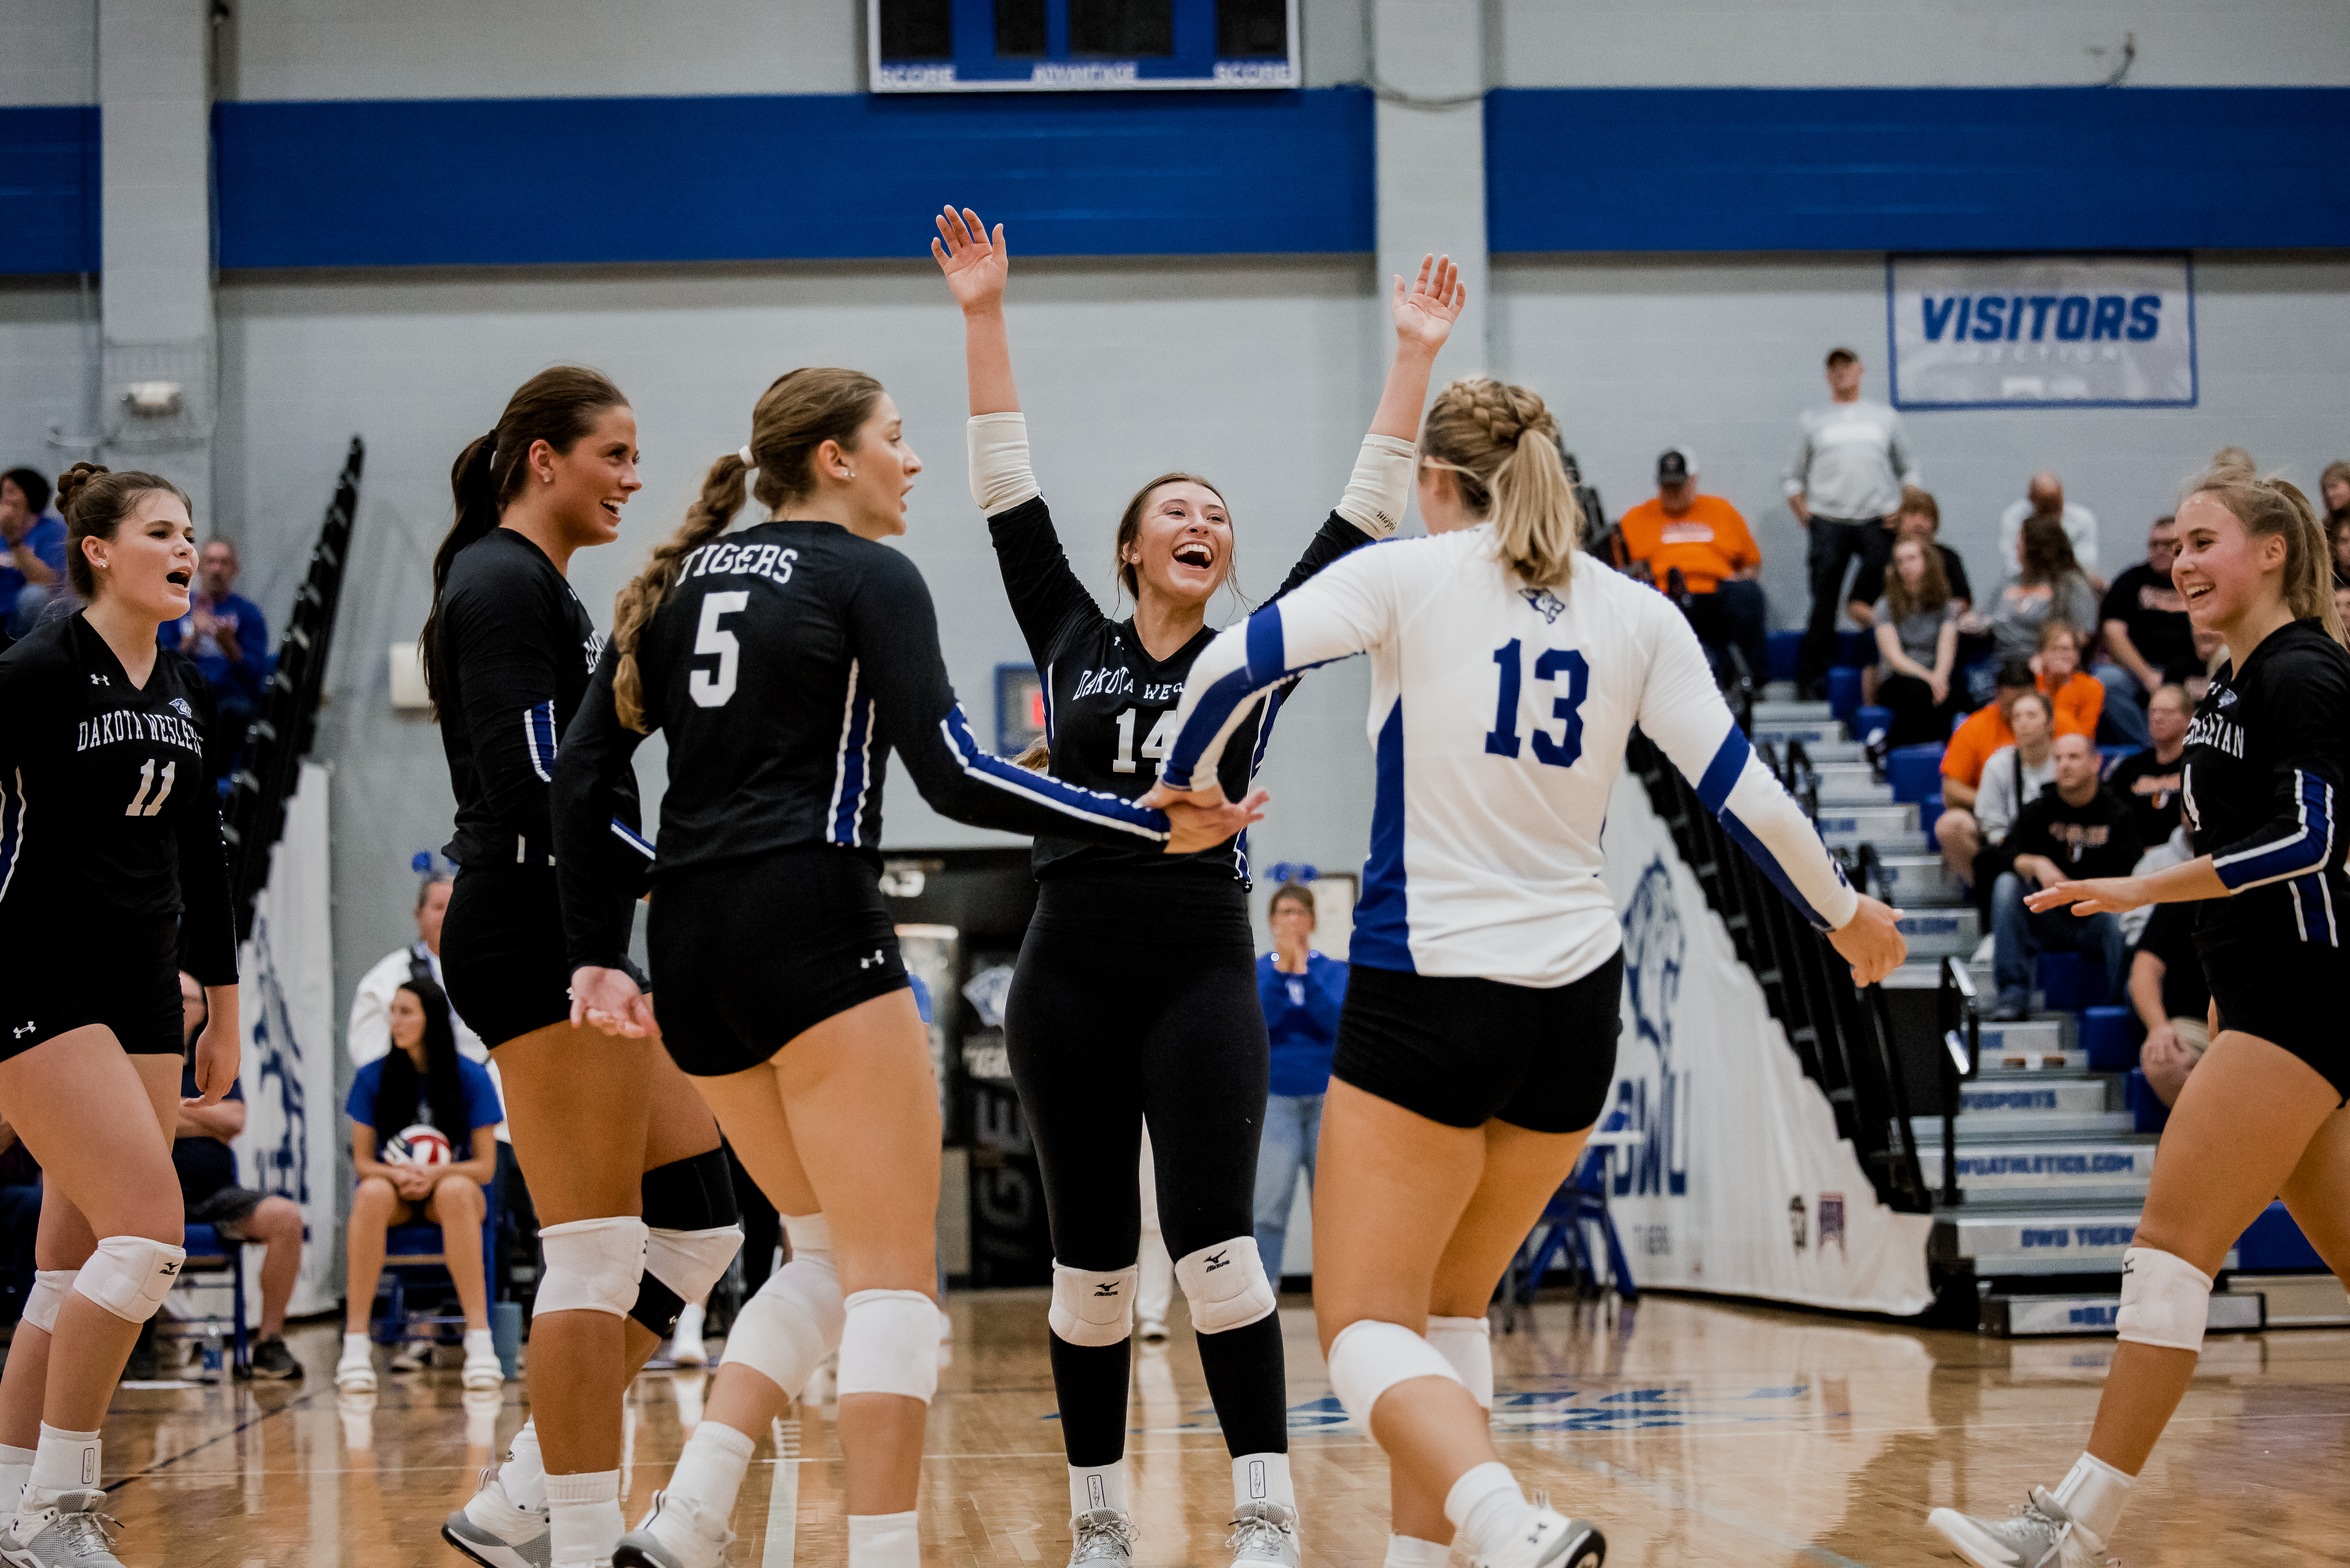 DWU WINS THE 'BATTLE OF THE TIGERS' IN STRAIGHT SETS